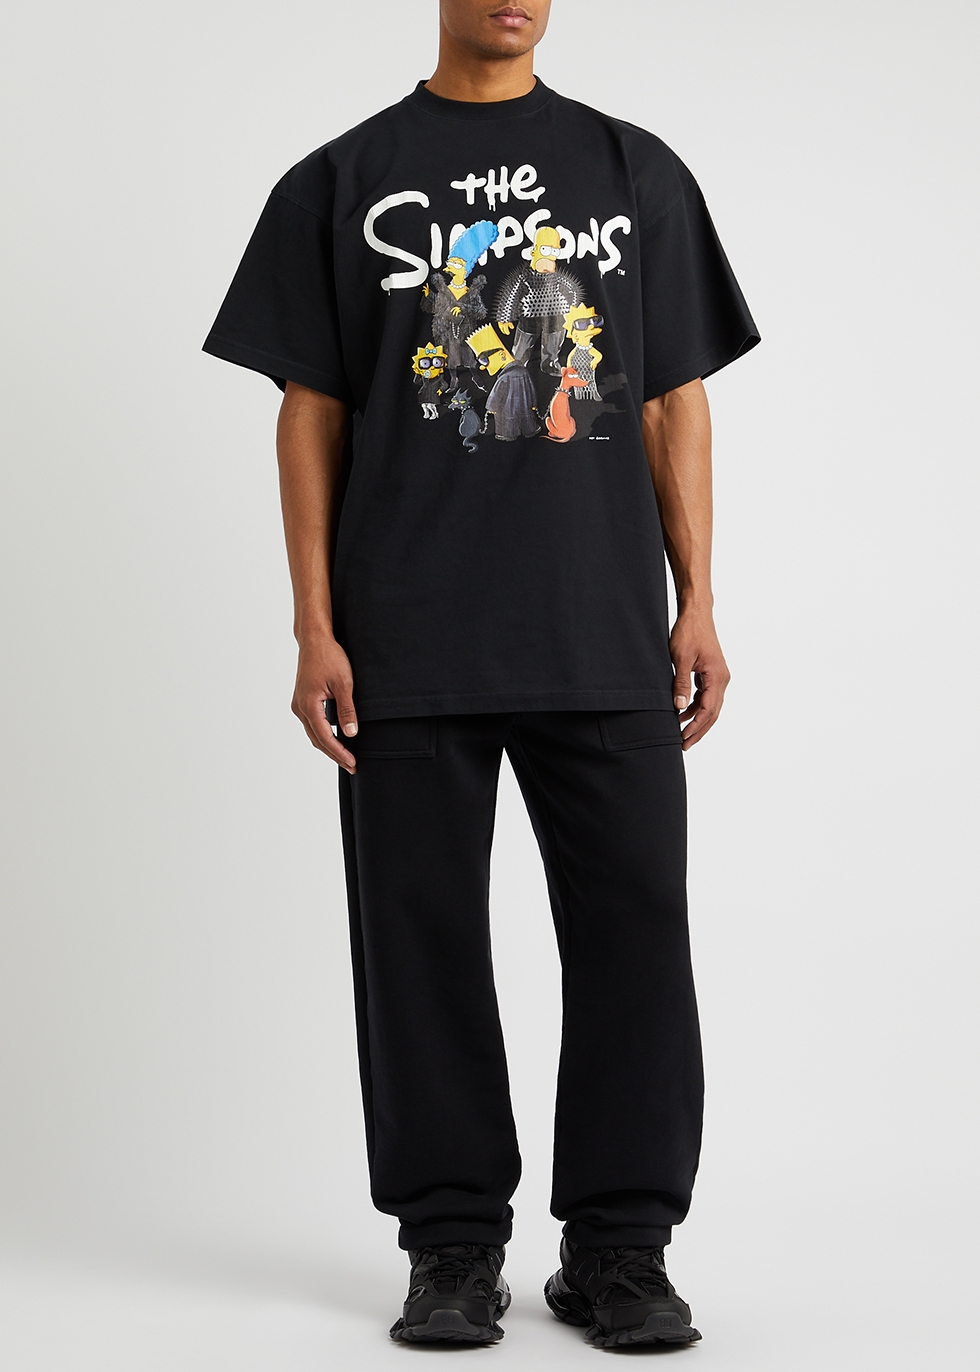 Balenciaga Meets The Simpsons For Its SS22 Display